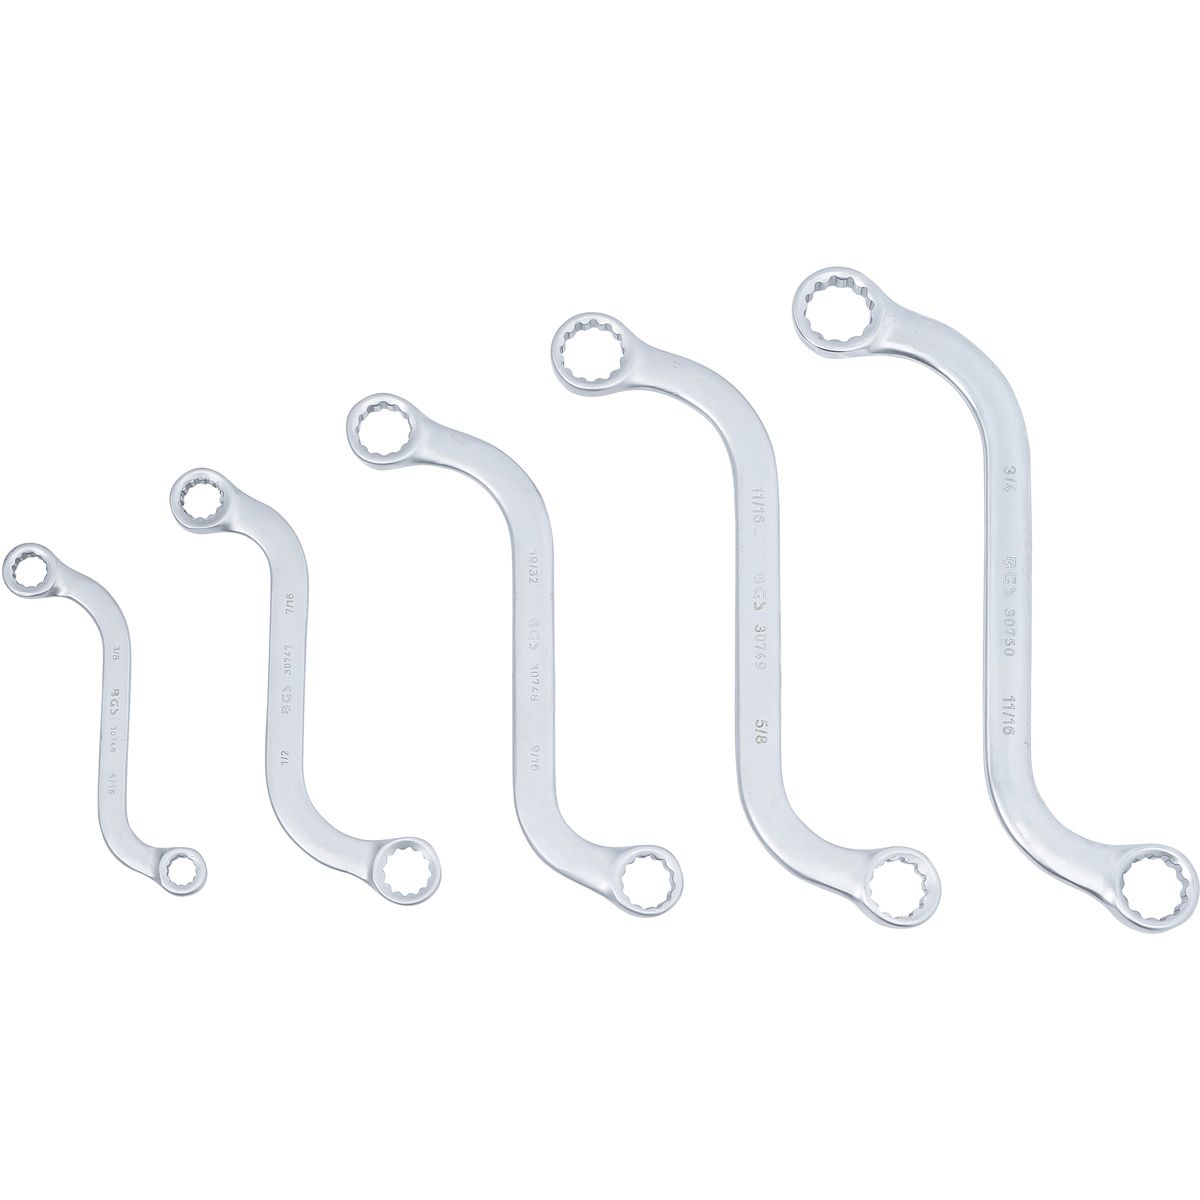 S-Type Double Ring Spanner Set | Inch Sizes | 3/8" - 3/4" | 5 pcs.